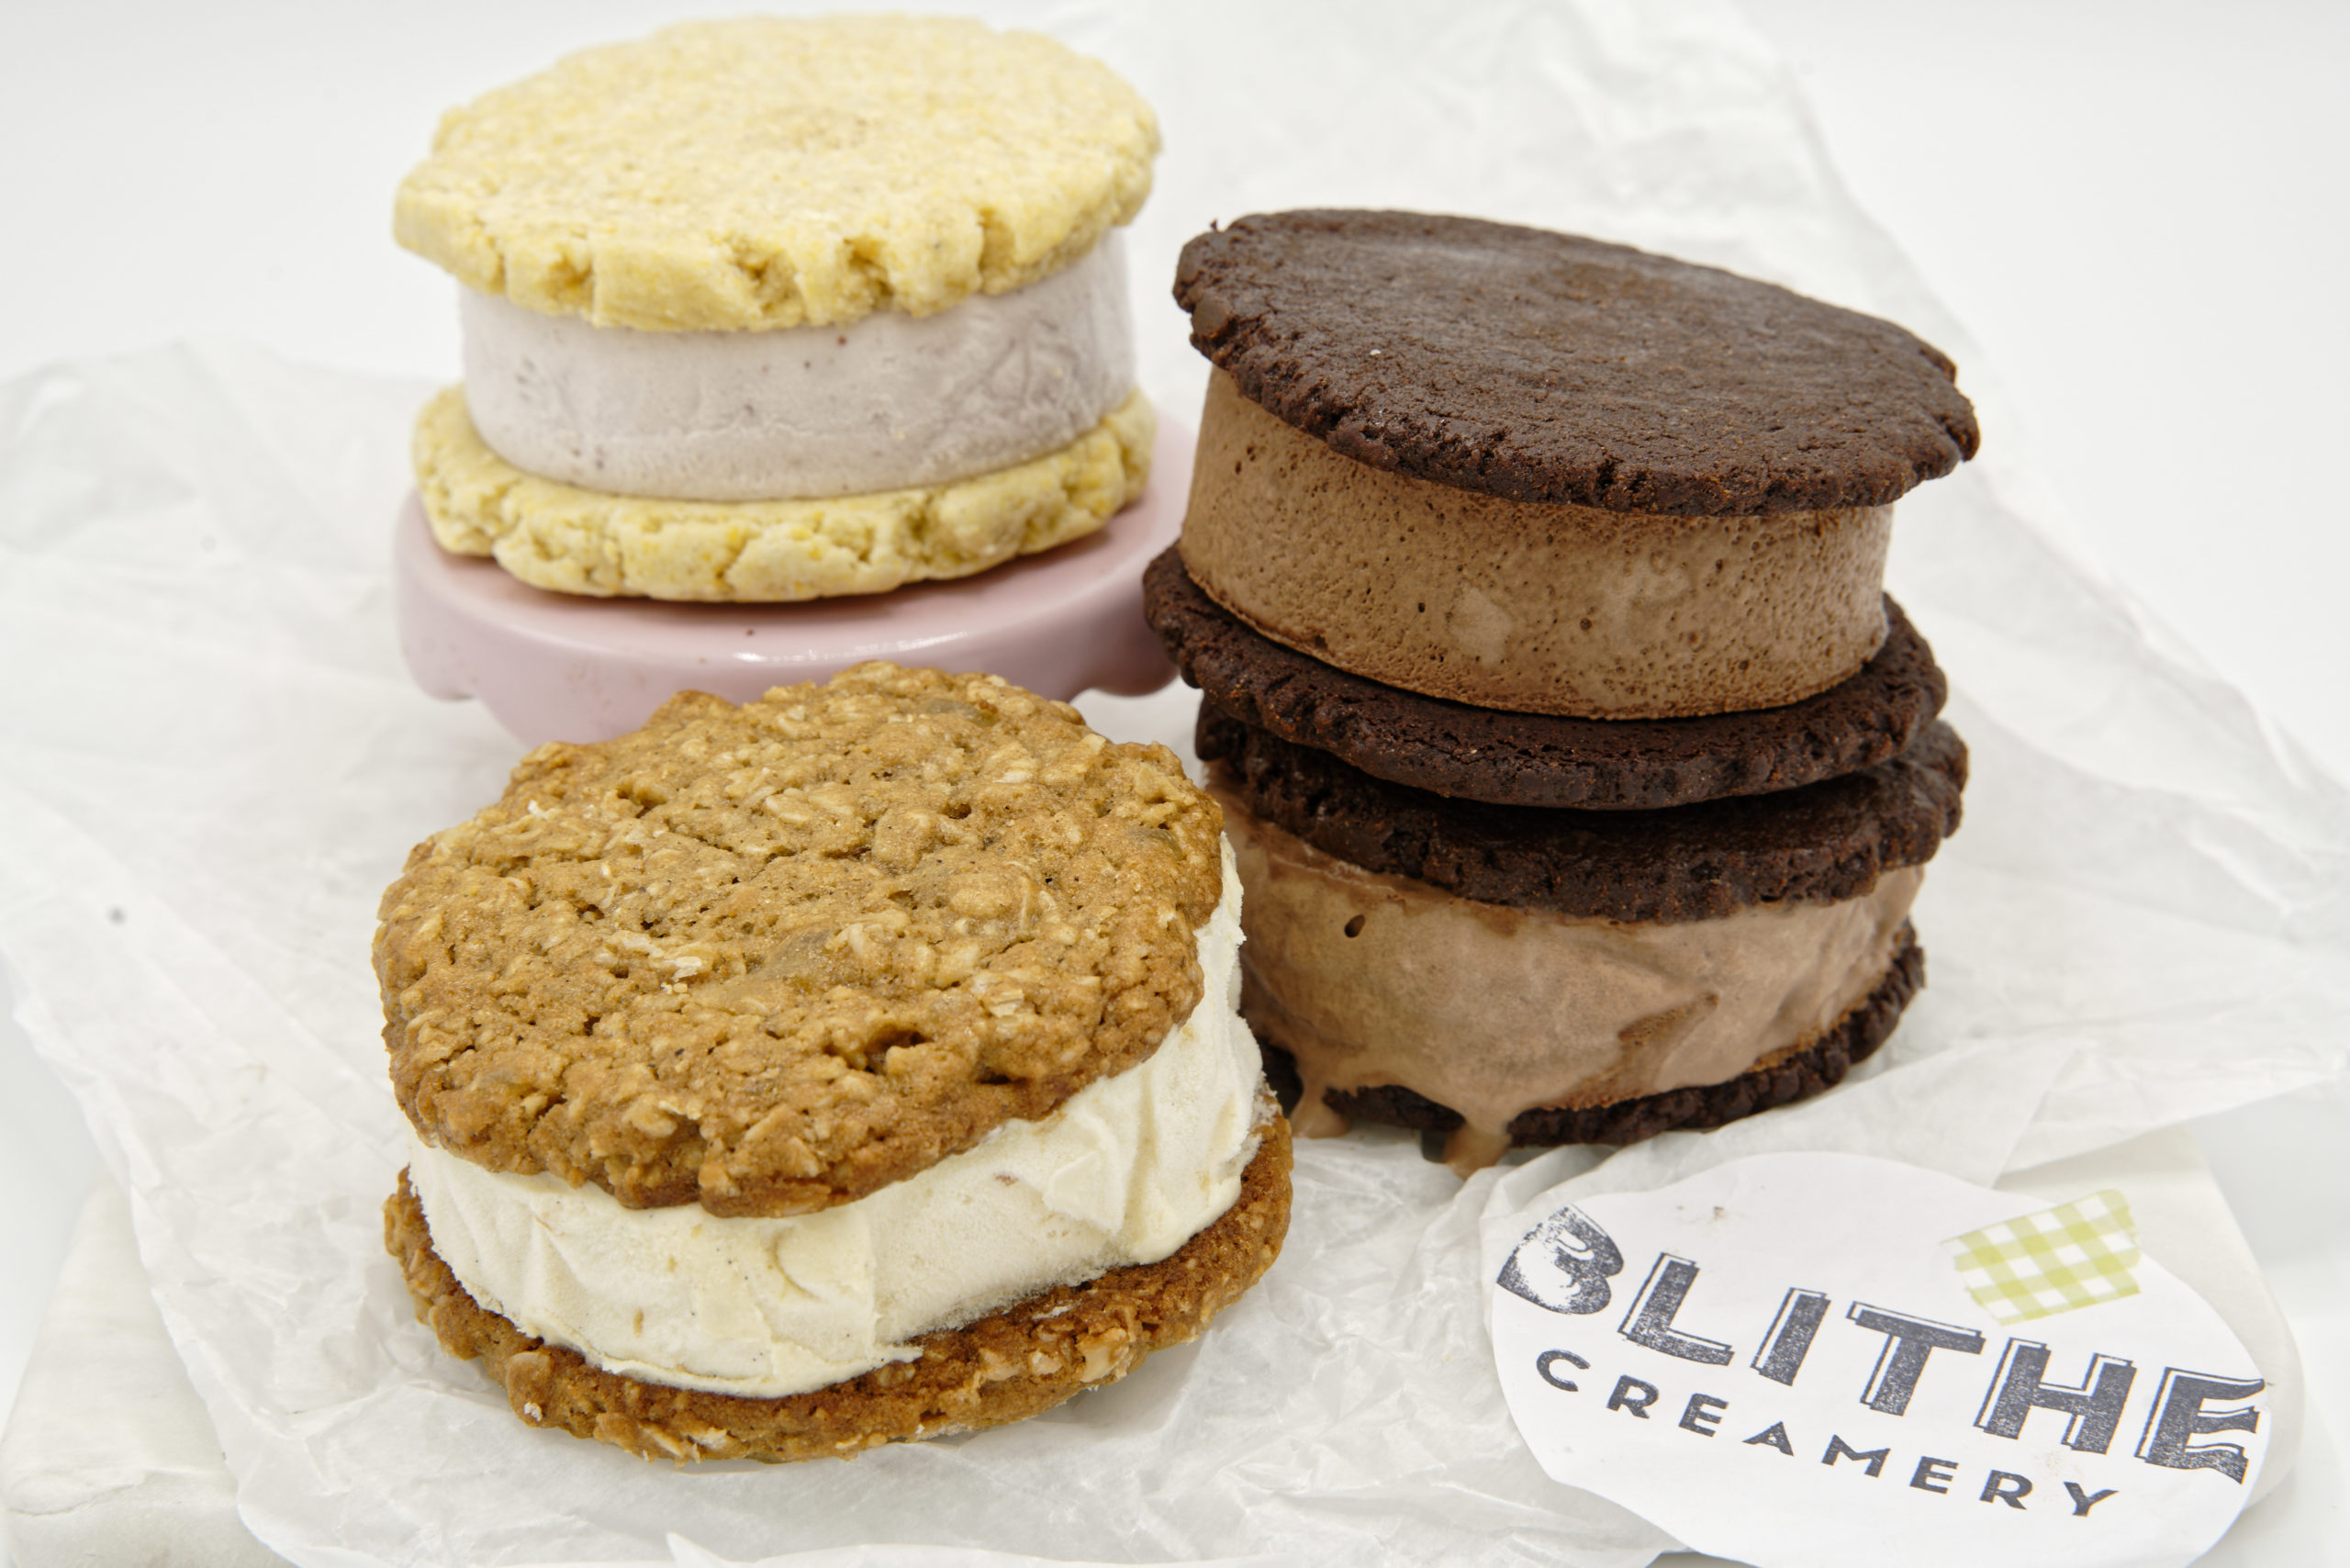 Various flavors of ice cream sandwiches arranged next to each other